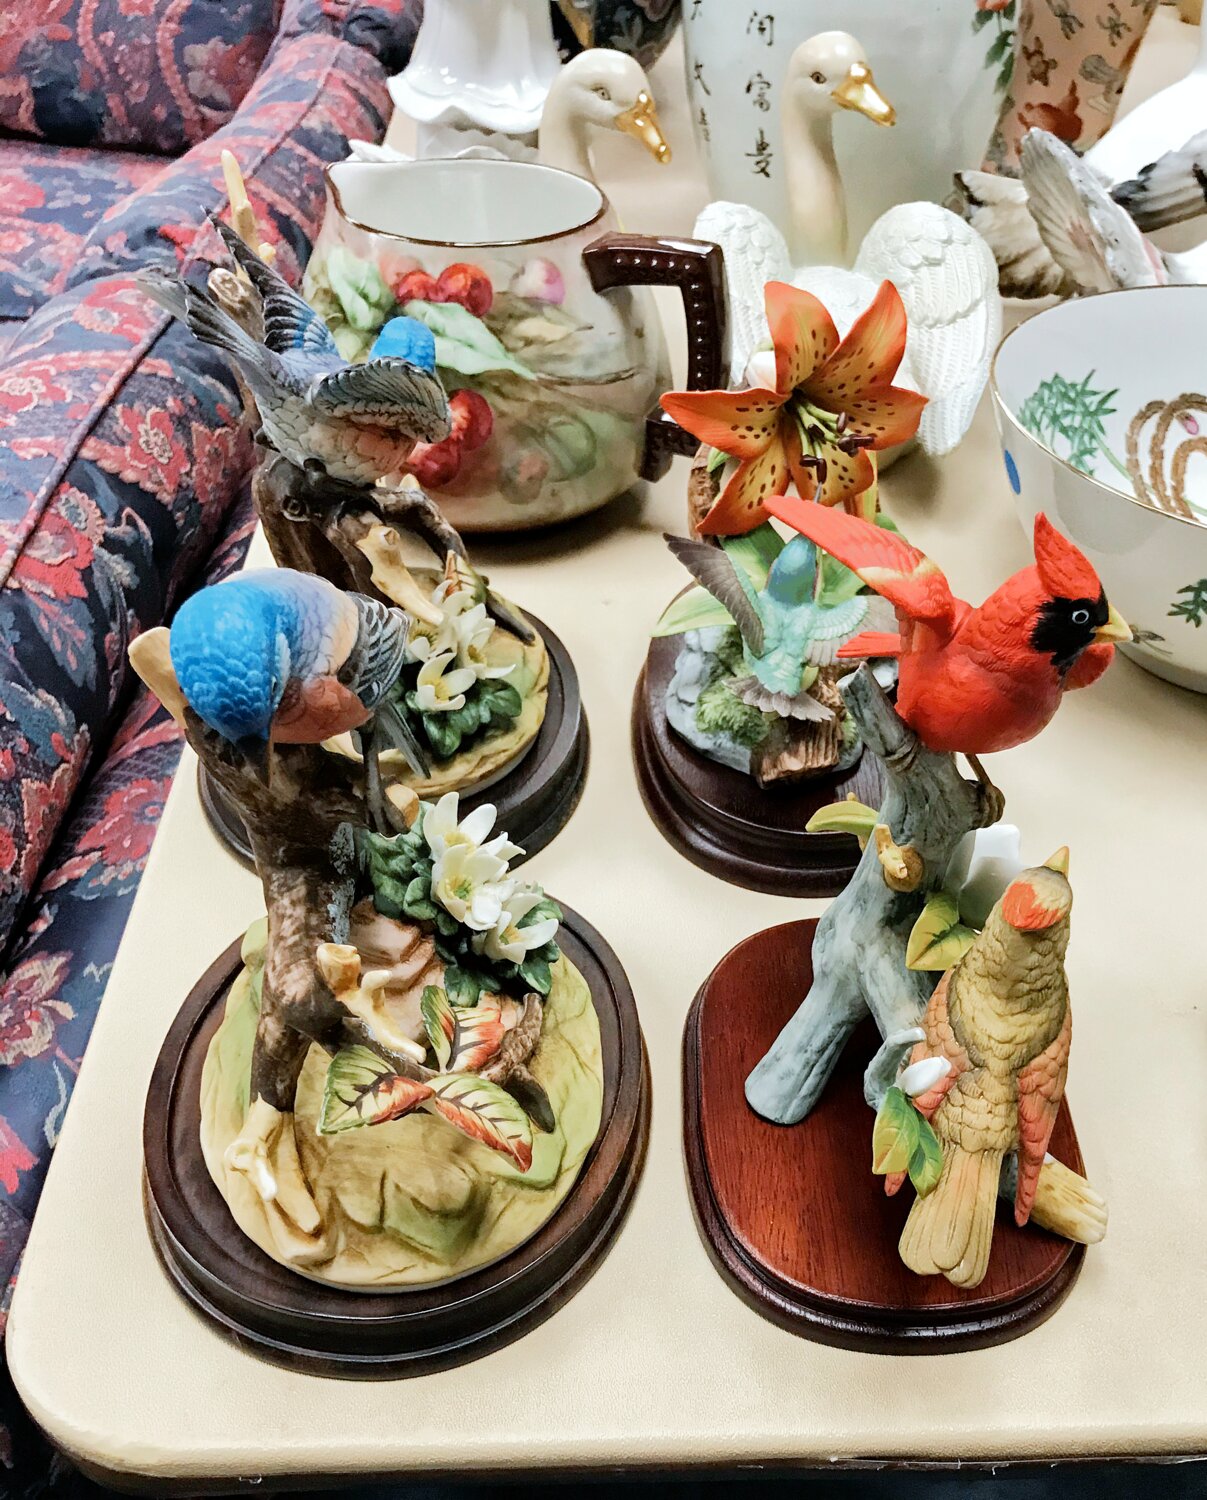 Colorful bird figurines will be among the items to be sold during the Mineola Civic Center’s estate sale Thursday through Saturday.